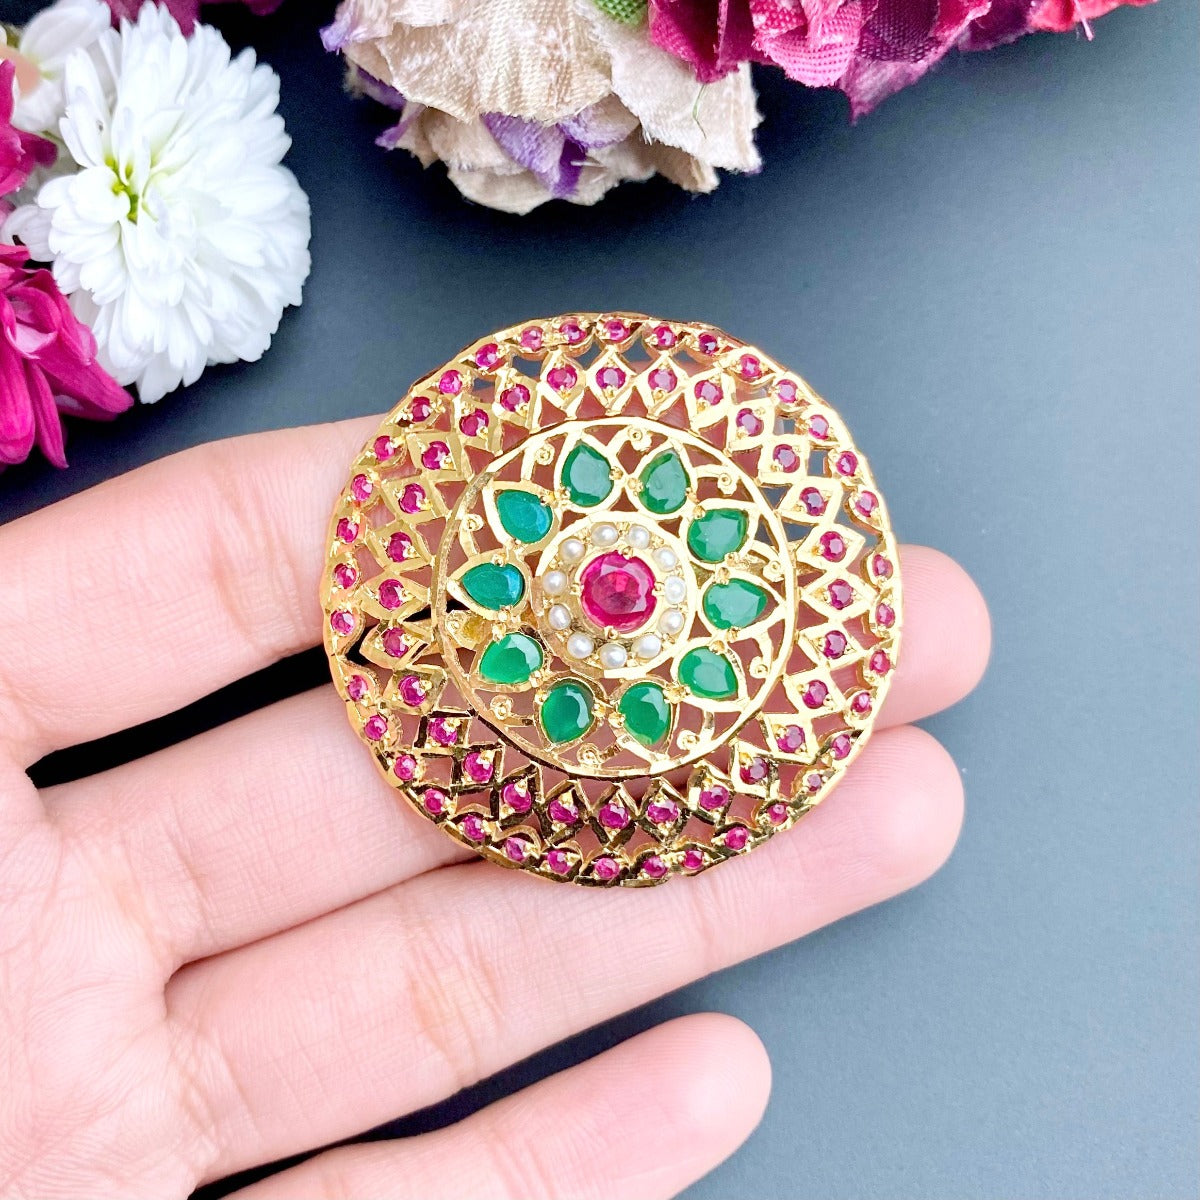 Gold Coated Rings To Buy Go To Website #jewellerydesignshub #jdh  #jewellerydesigns #jewellery #designs #latestjewellery #jewellery #fas... |  Instagram